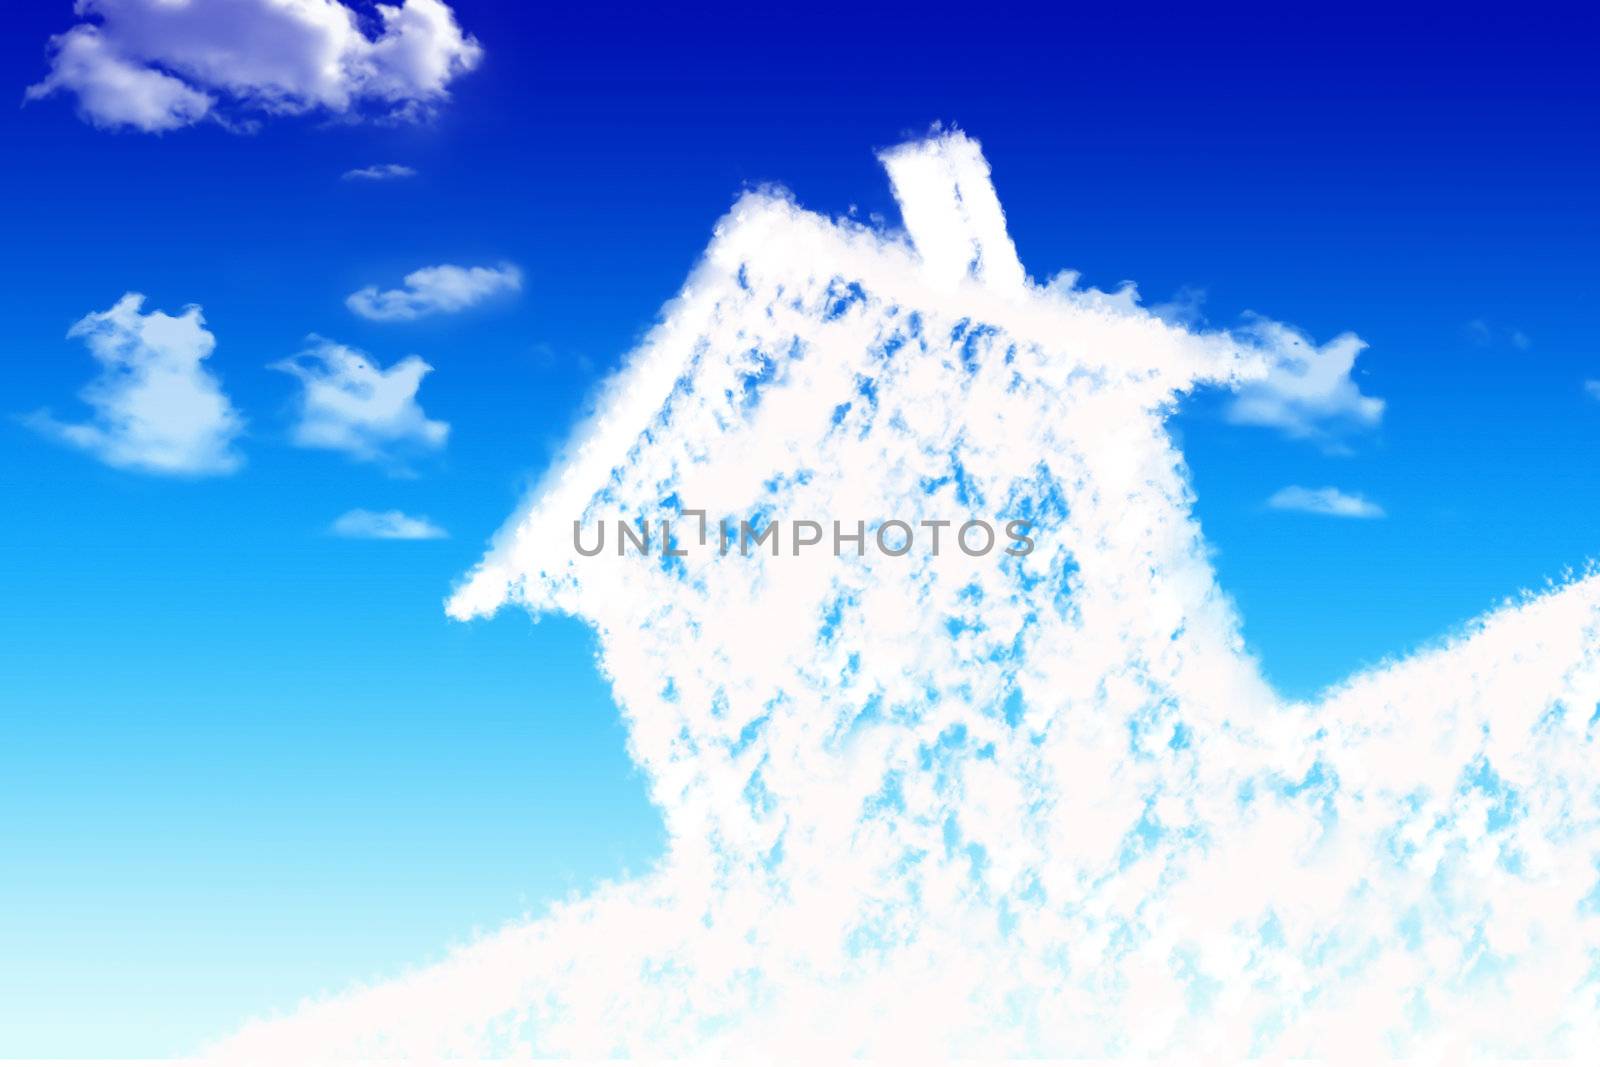 Eco house metaphor. House with sky and clouds